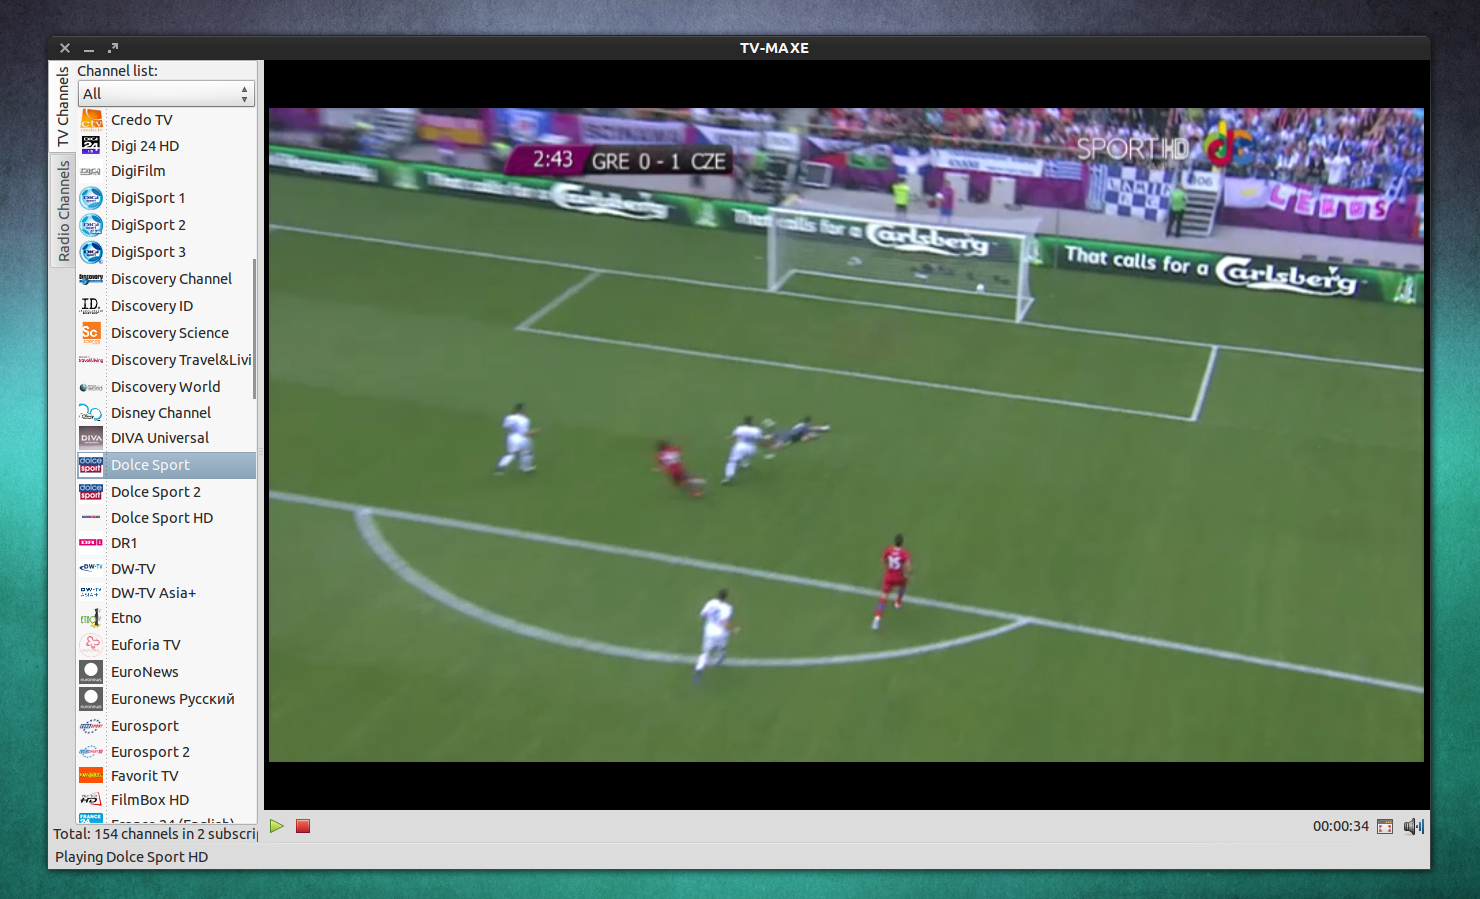 [13.10] Is there an APP for LIVE -U.S.- TV networks to watch sports and TV shows???